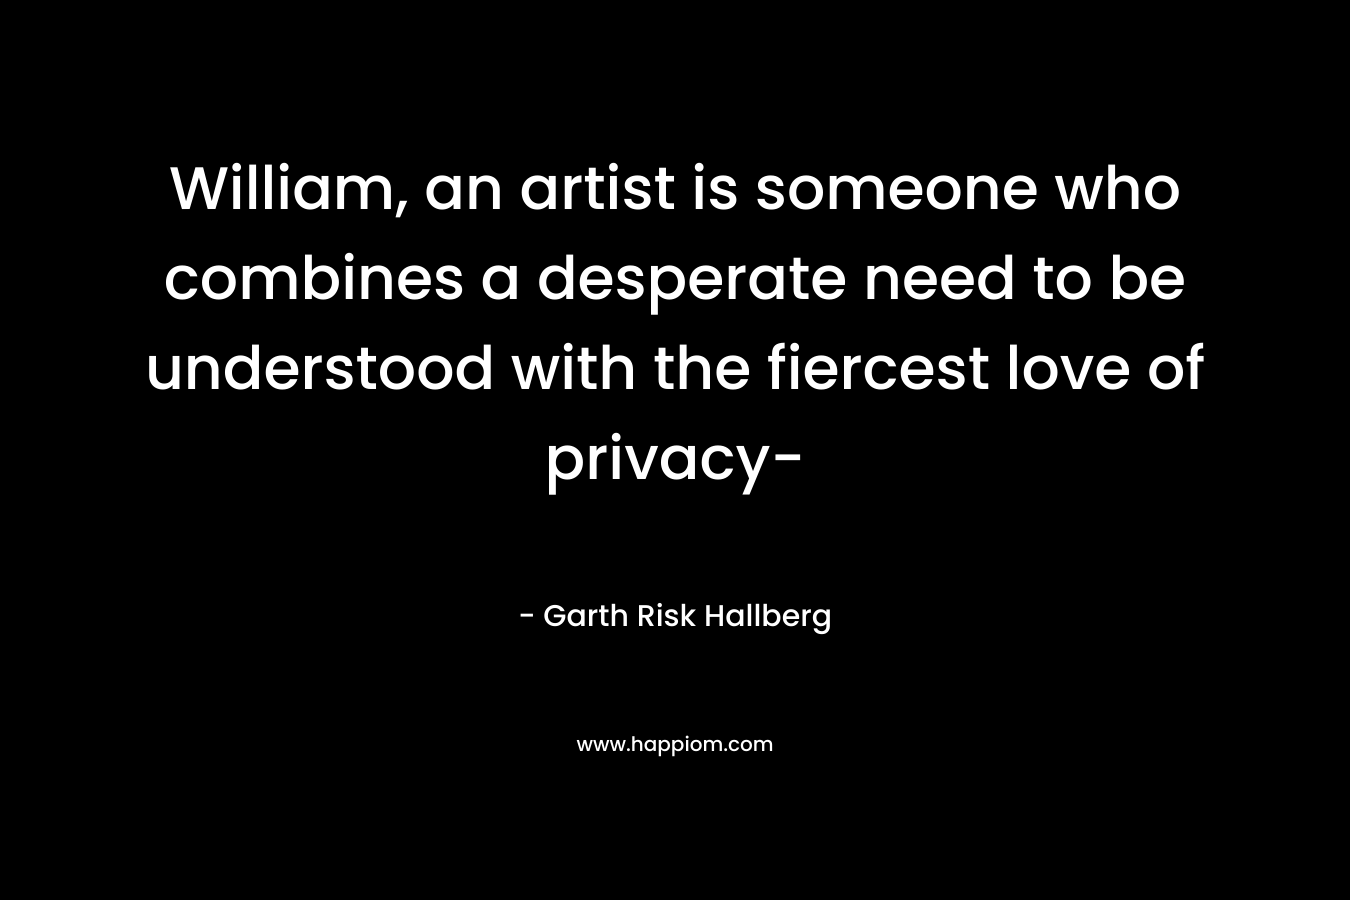 William, an artist is someone who combines a desperate need to be understood with the fiercest love of privacy- – Garth Risk Hallberg